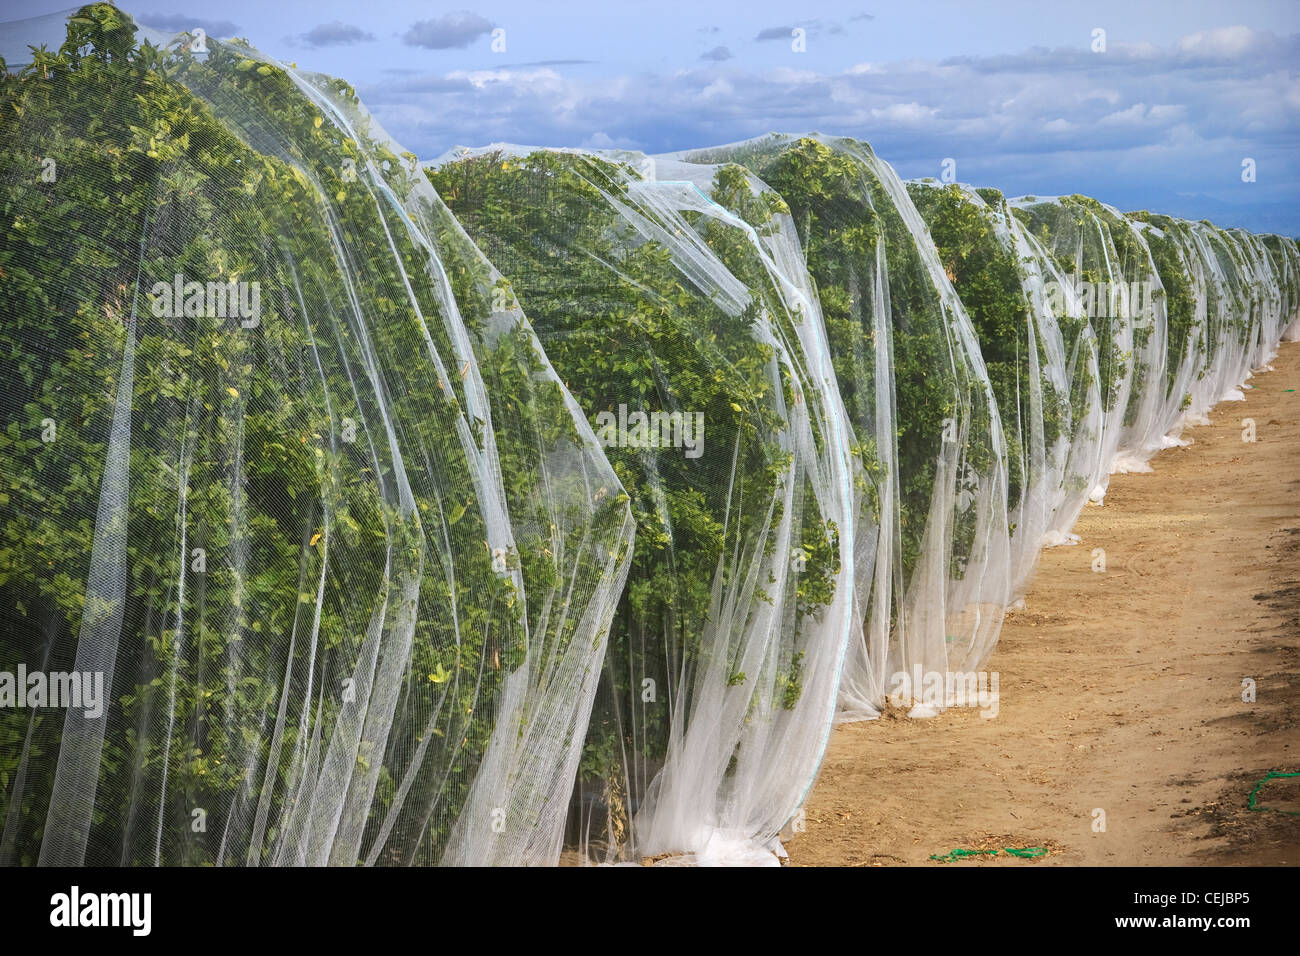 Agriculture - Tangerine orchard covered with bee netting to prevent polination, thus producing seedless fruit / California, USA. Stock Photo